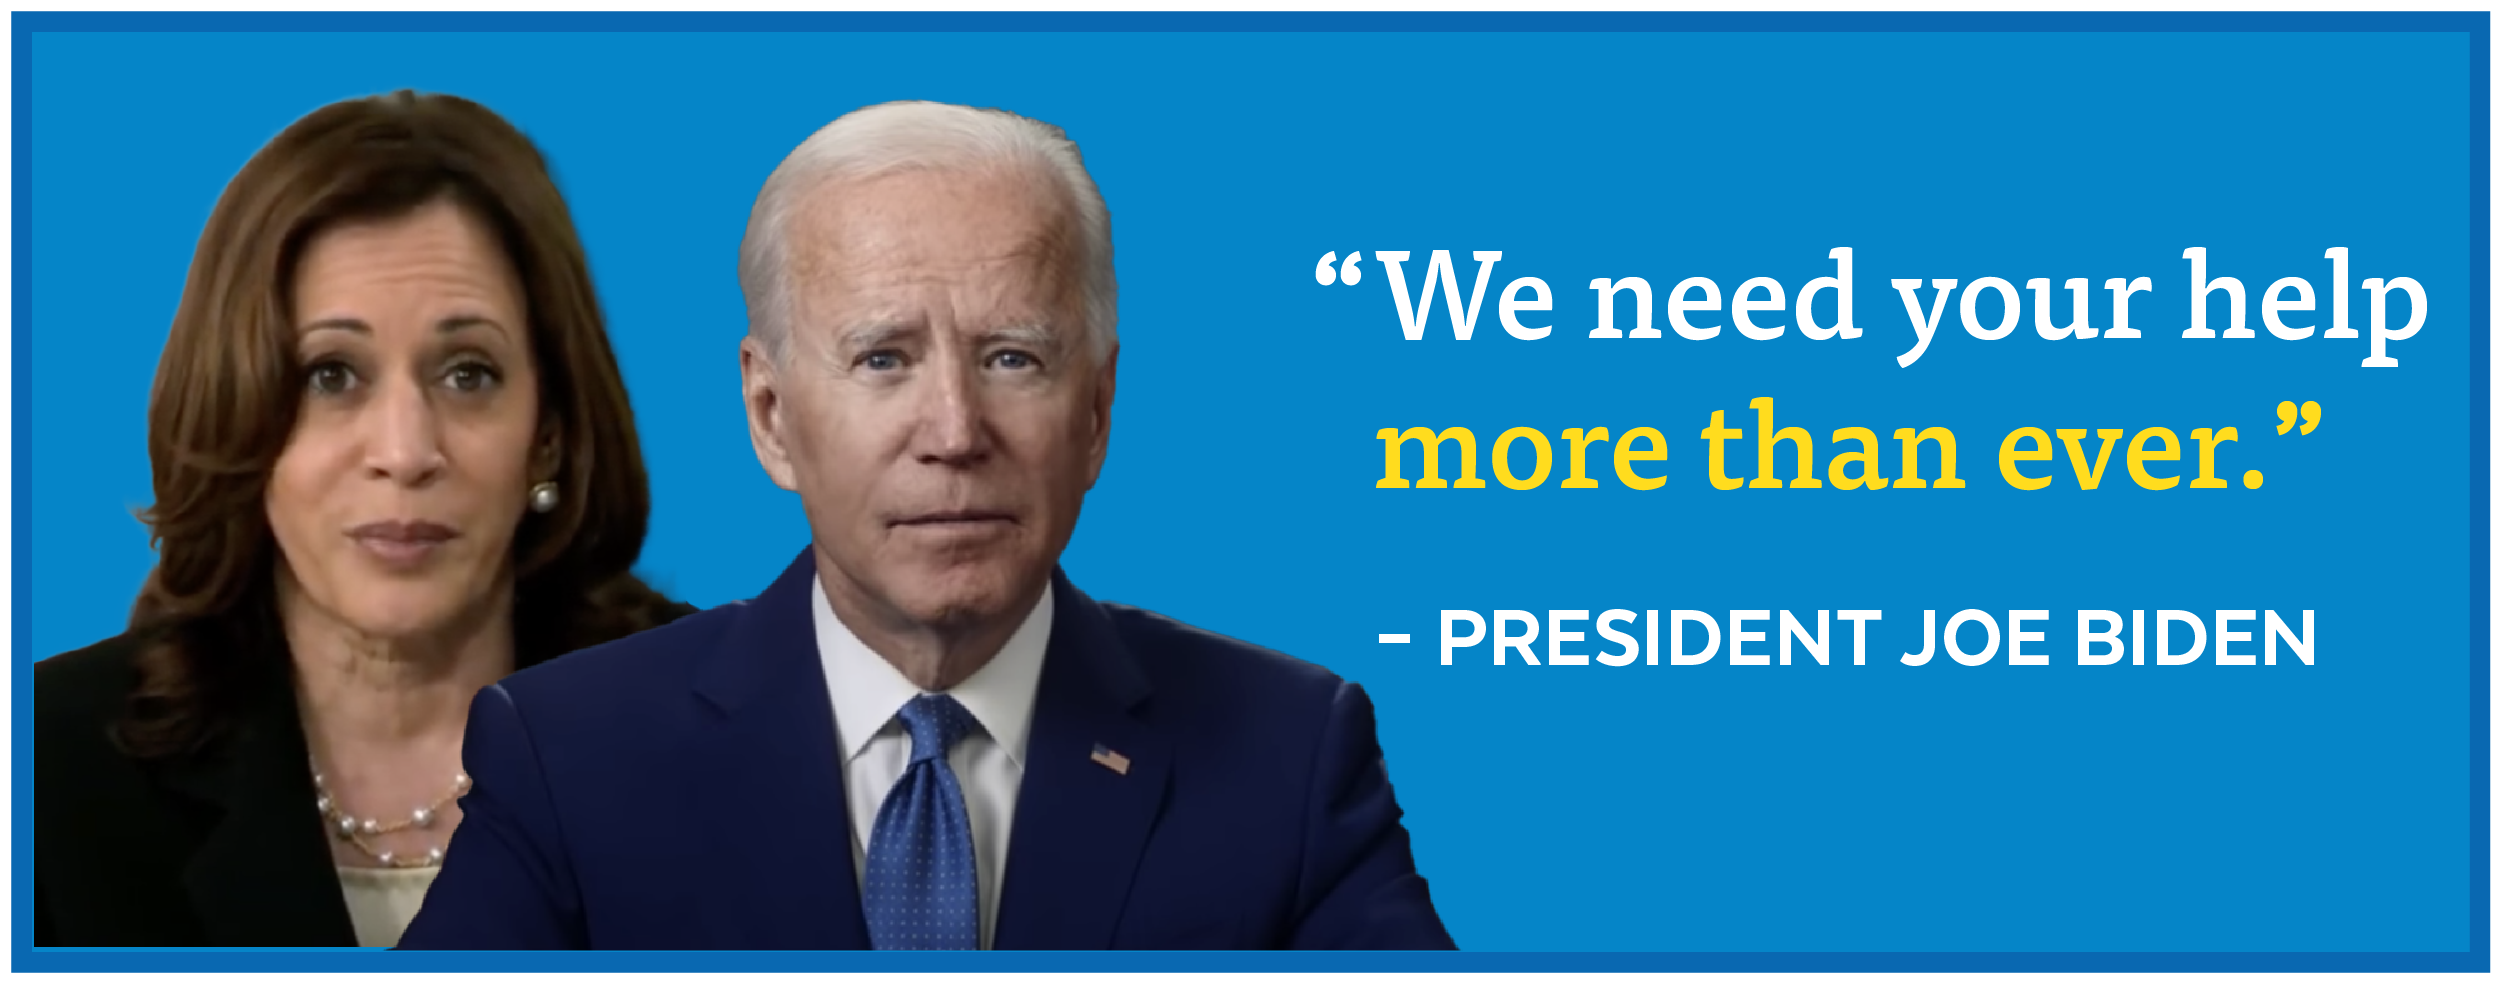 Biden: 'We need your help more than ever.'